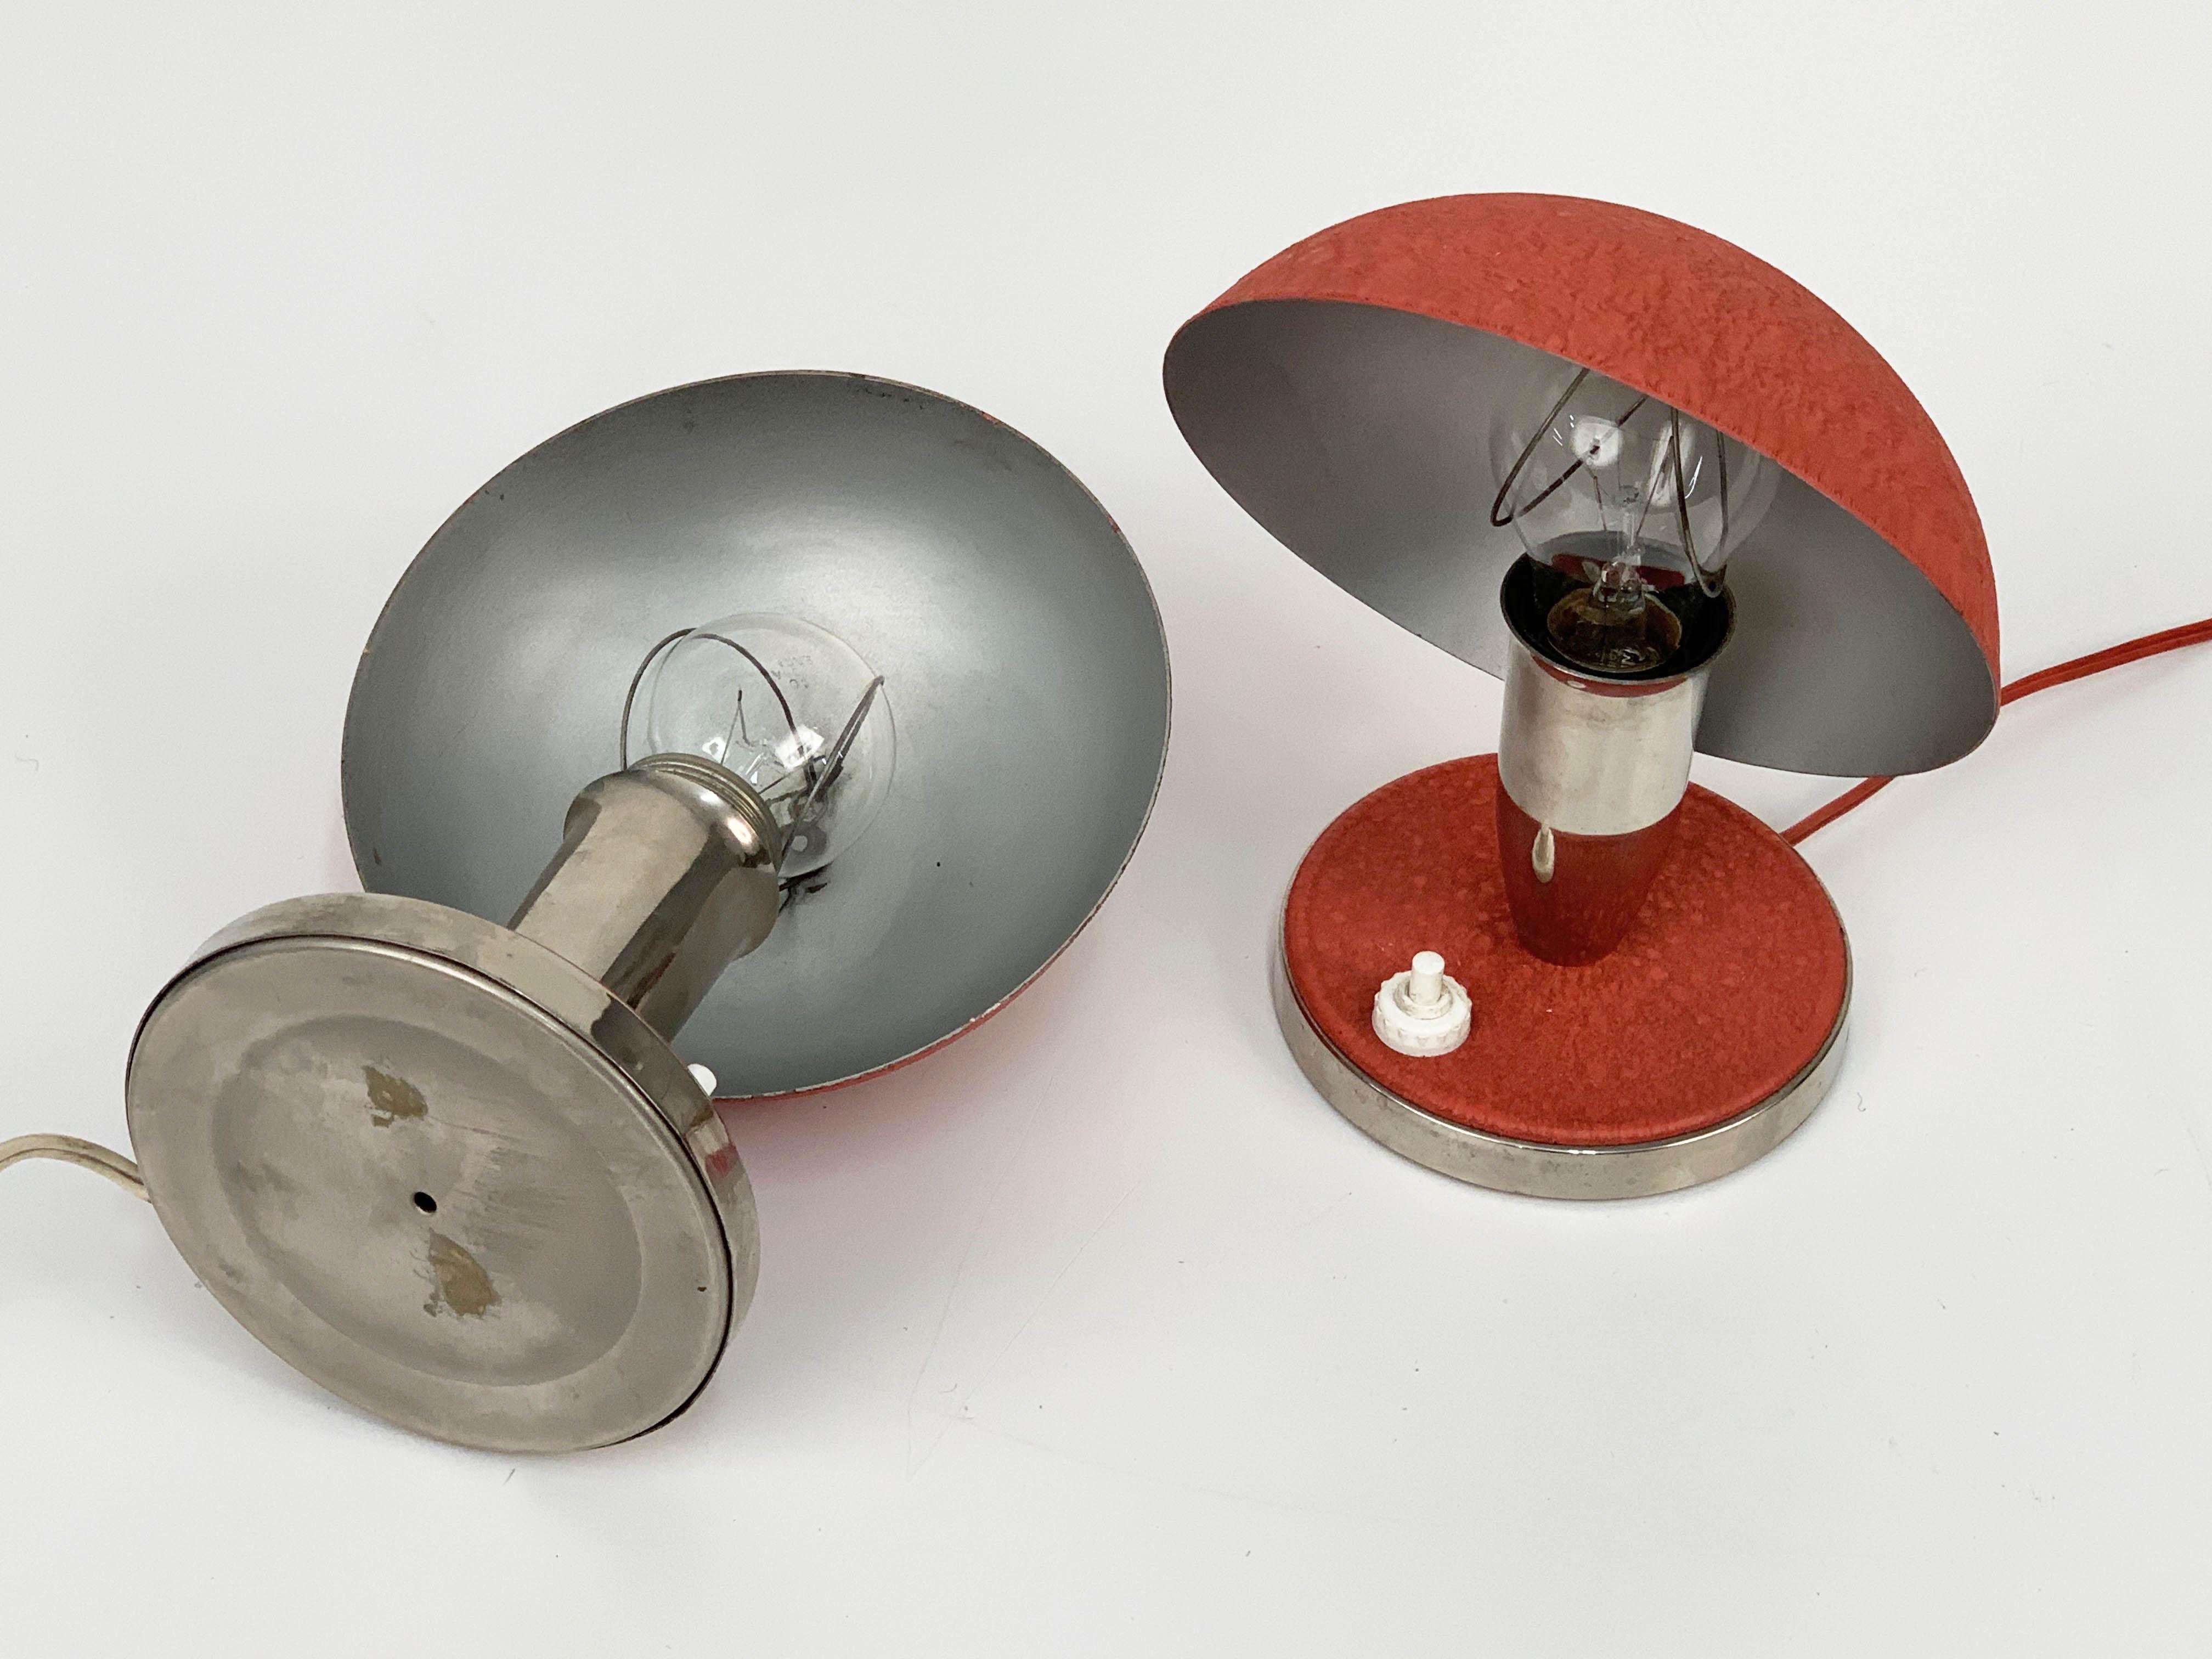 Pair of Bauhaus Red Metal and Aluminium Czech Table Lamps, 1930s For Sale 10